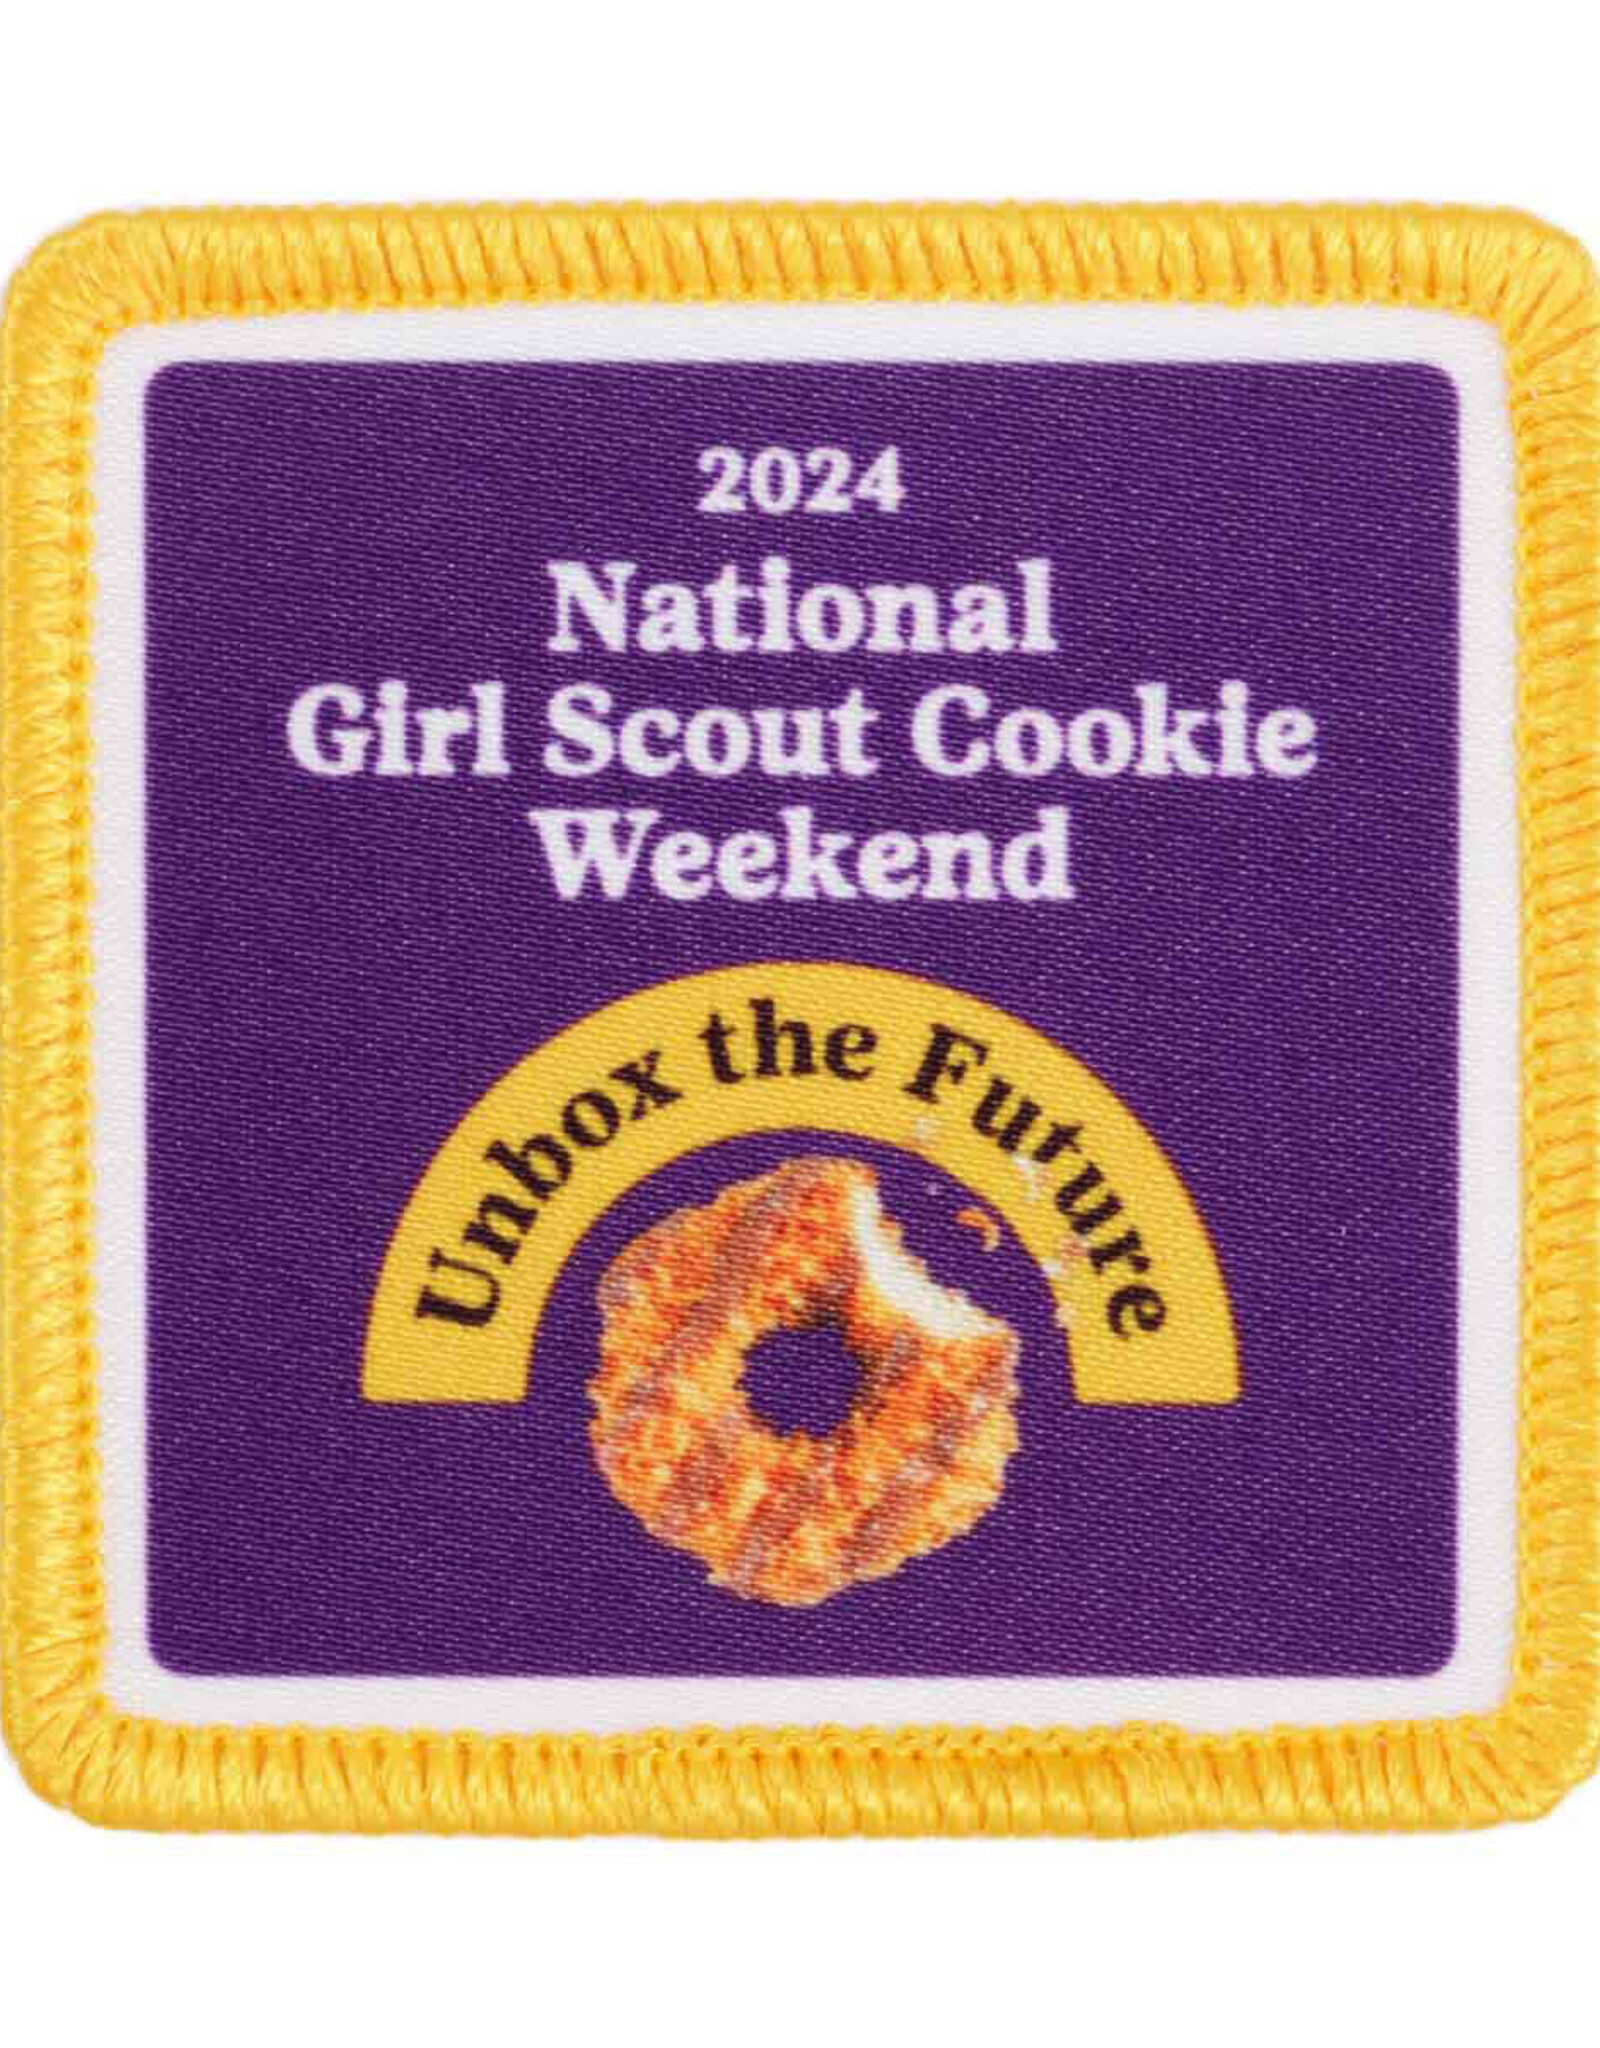 2024 National Girl Scout Cookie Weekend SewOn Patch Girl Scouts of